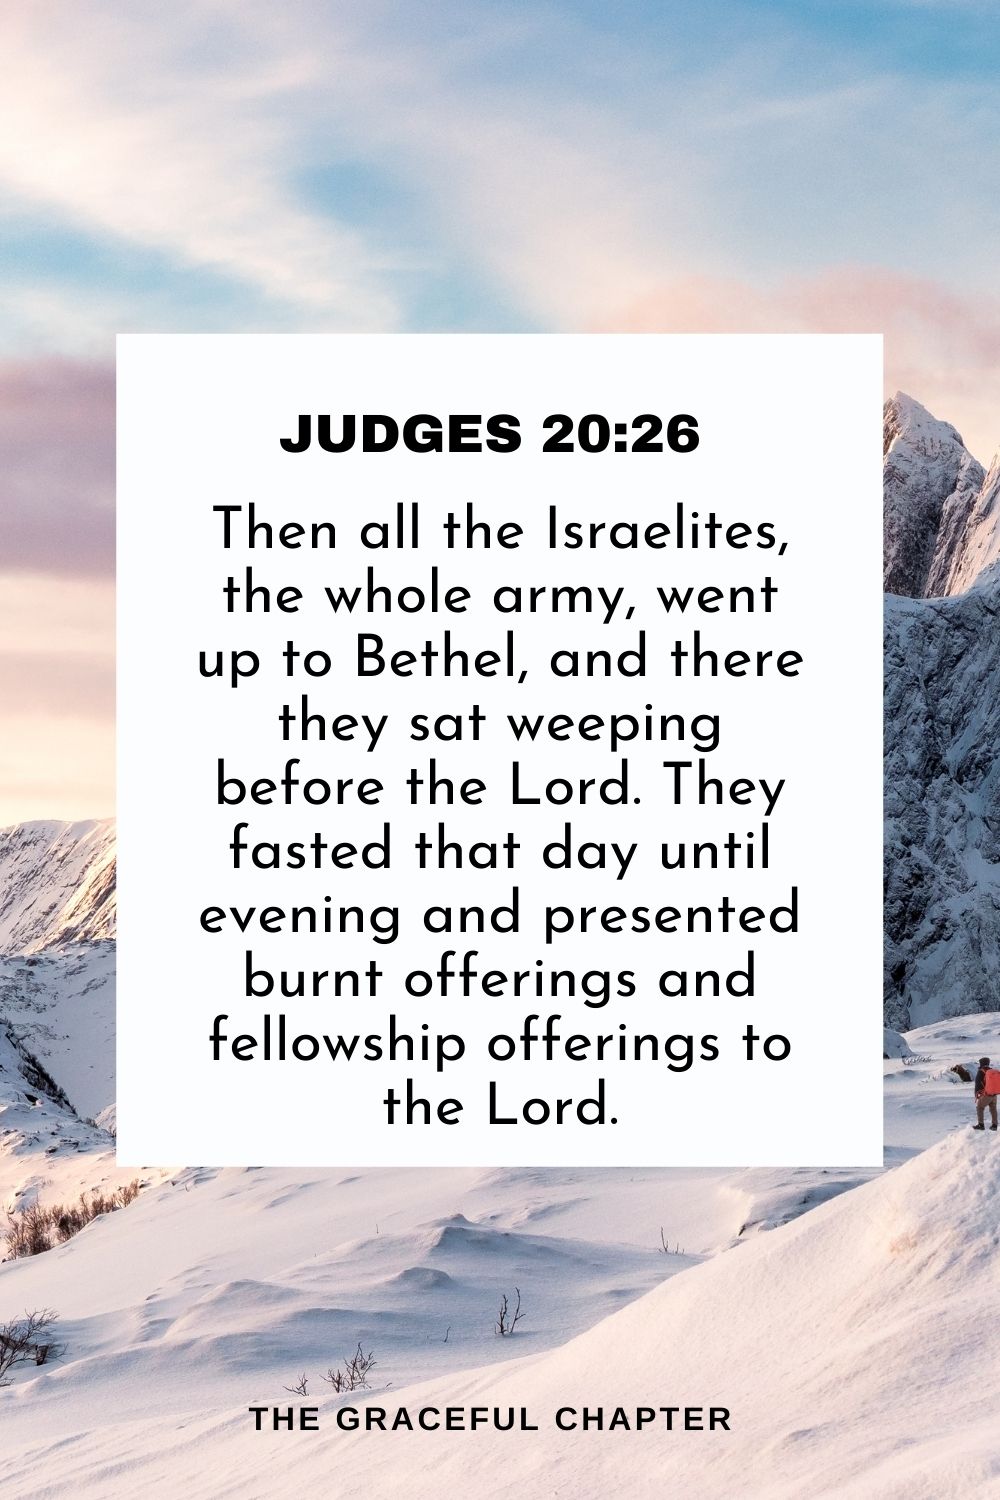 Then all the Israelites, the whole army, went up to Bethel, and there they sat weeping before the Lord. They fasted that day until evening and presented burnt offerings and fellowship offerings to the Lord. Judges 20:26